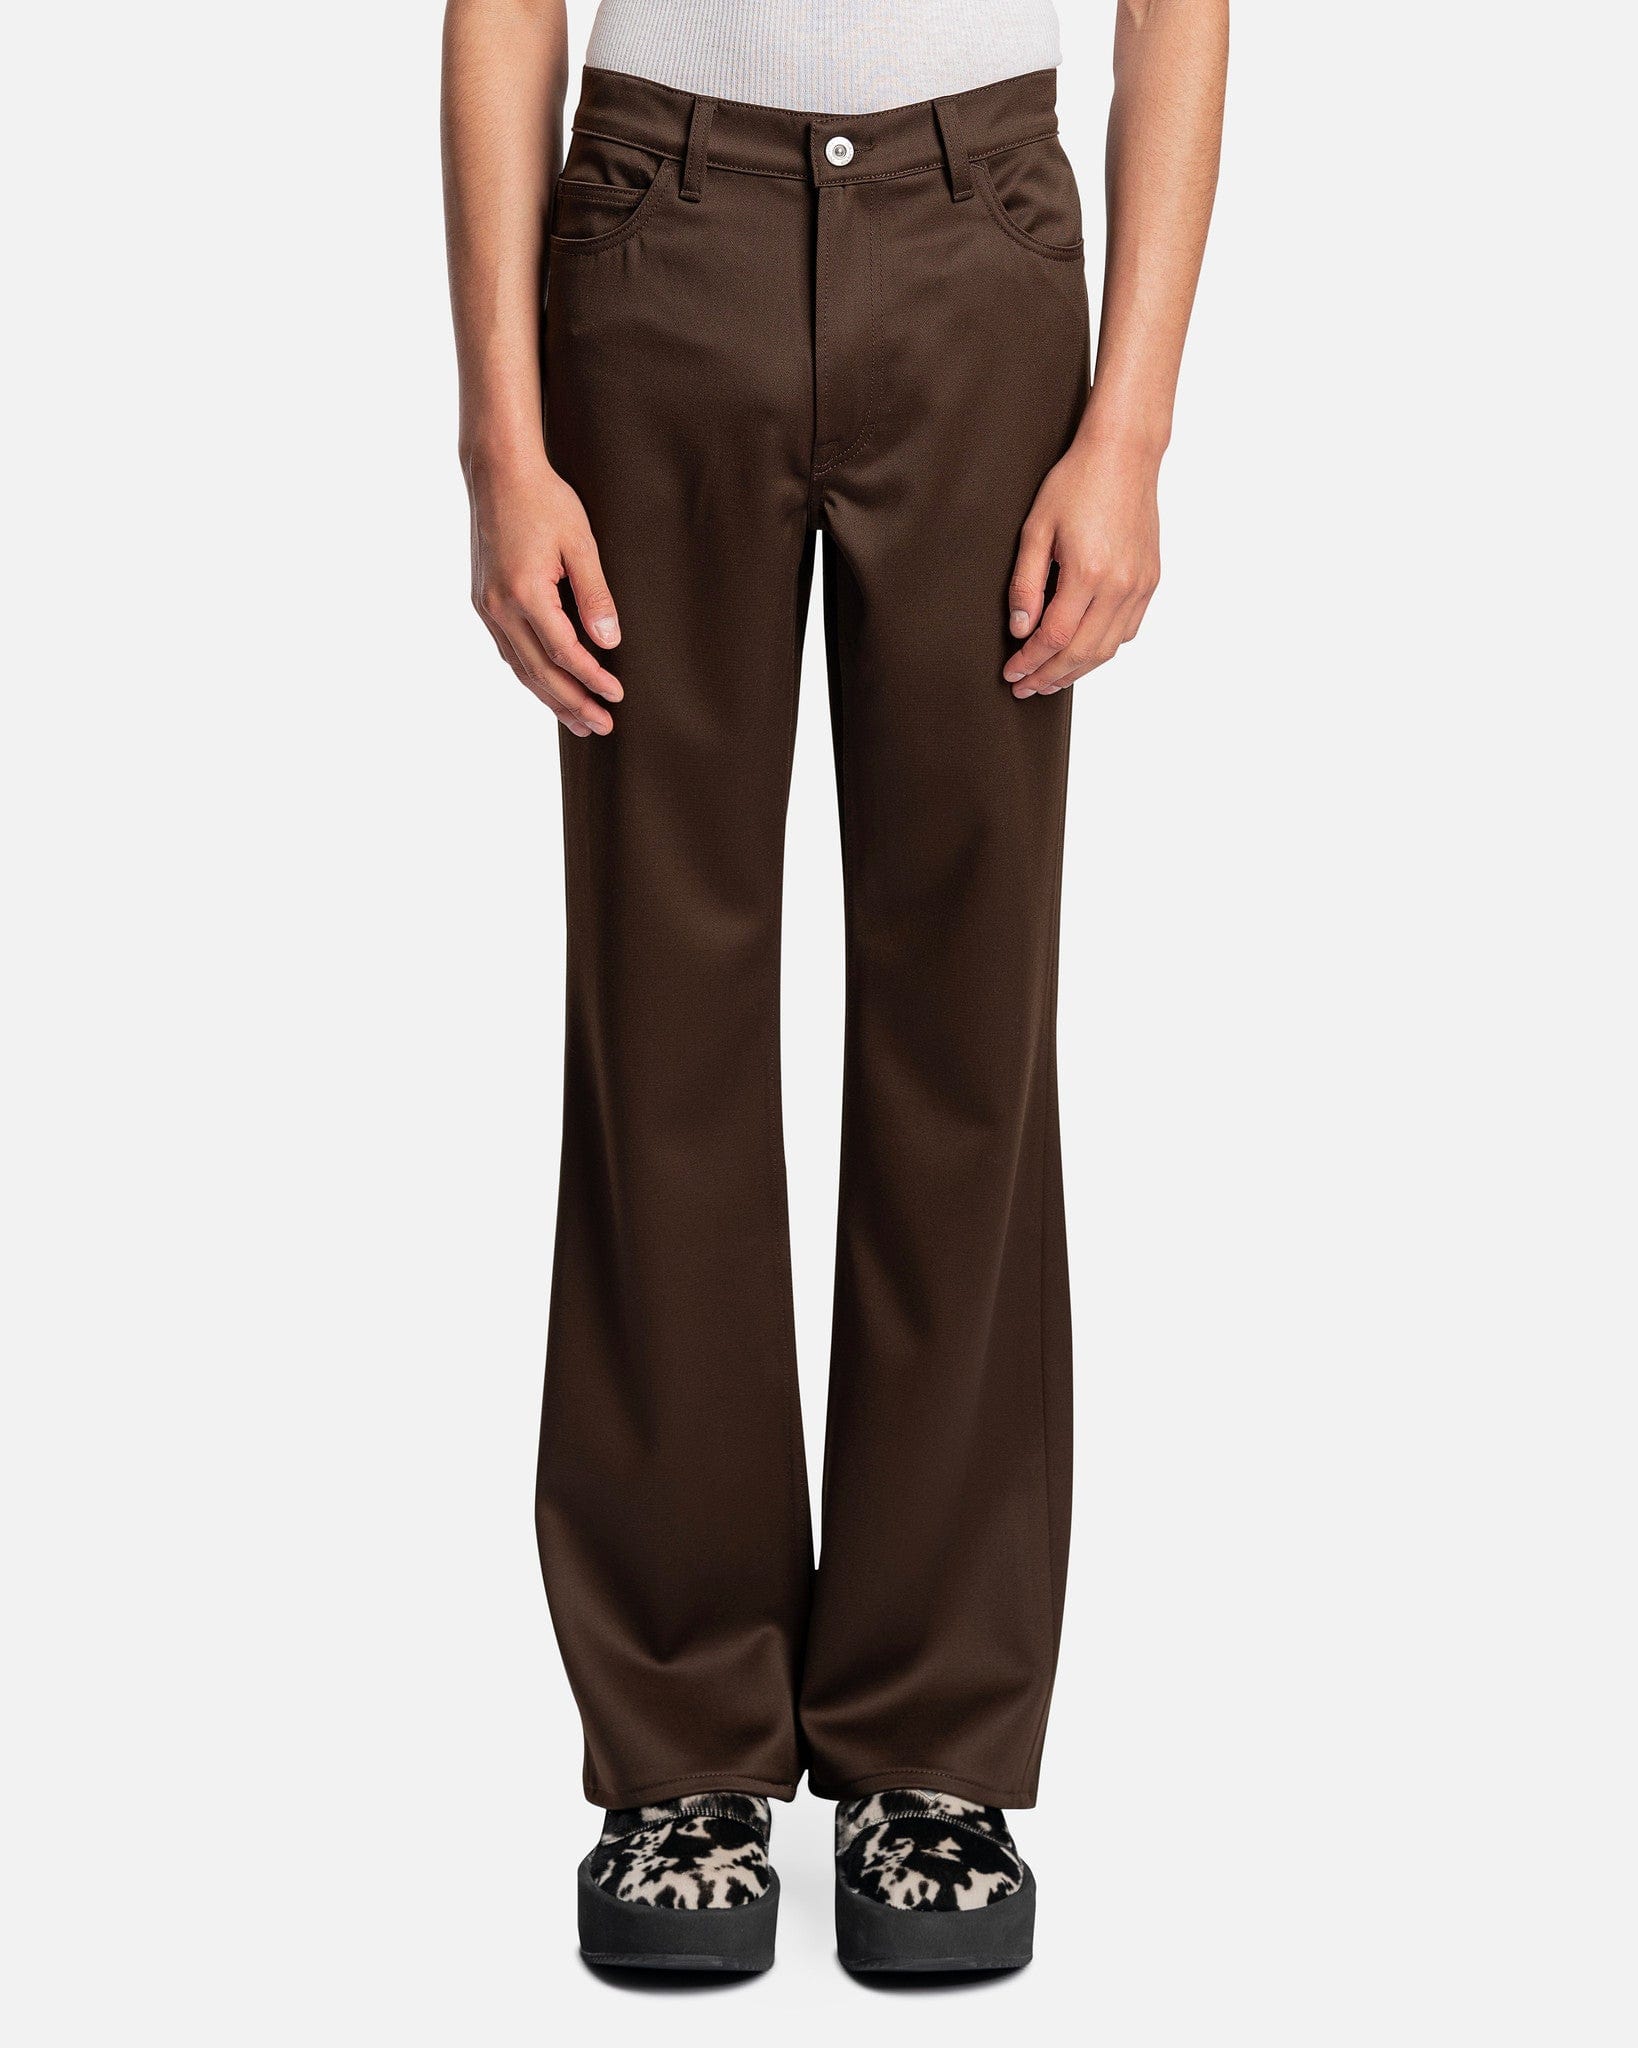 Our Legacy Men's Pants 70s Cut in Brown Exquisite Wool